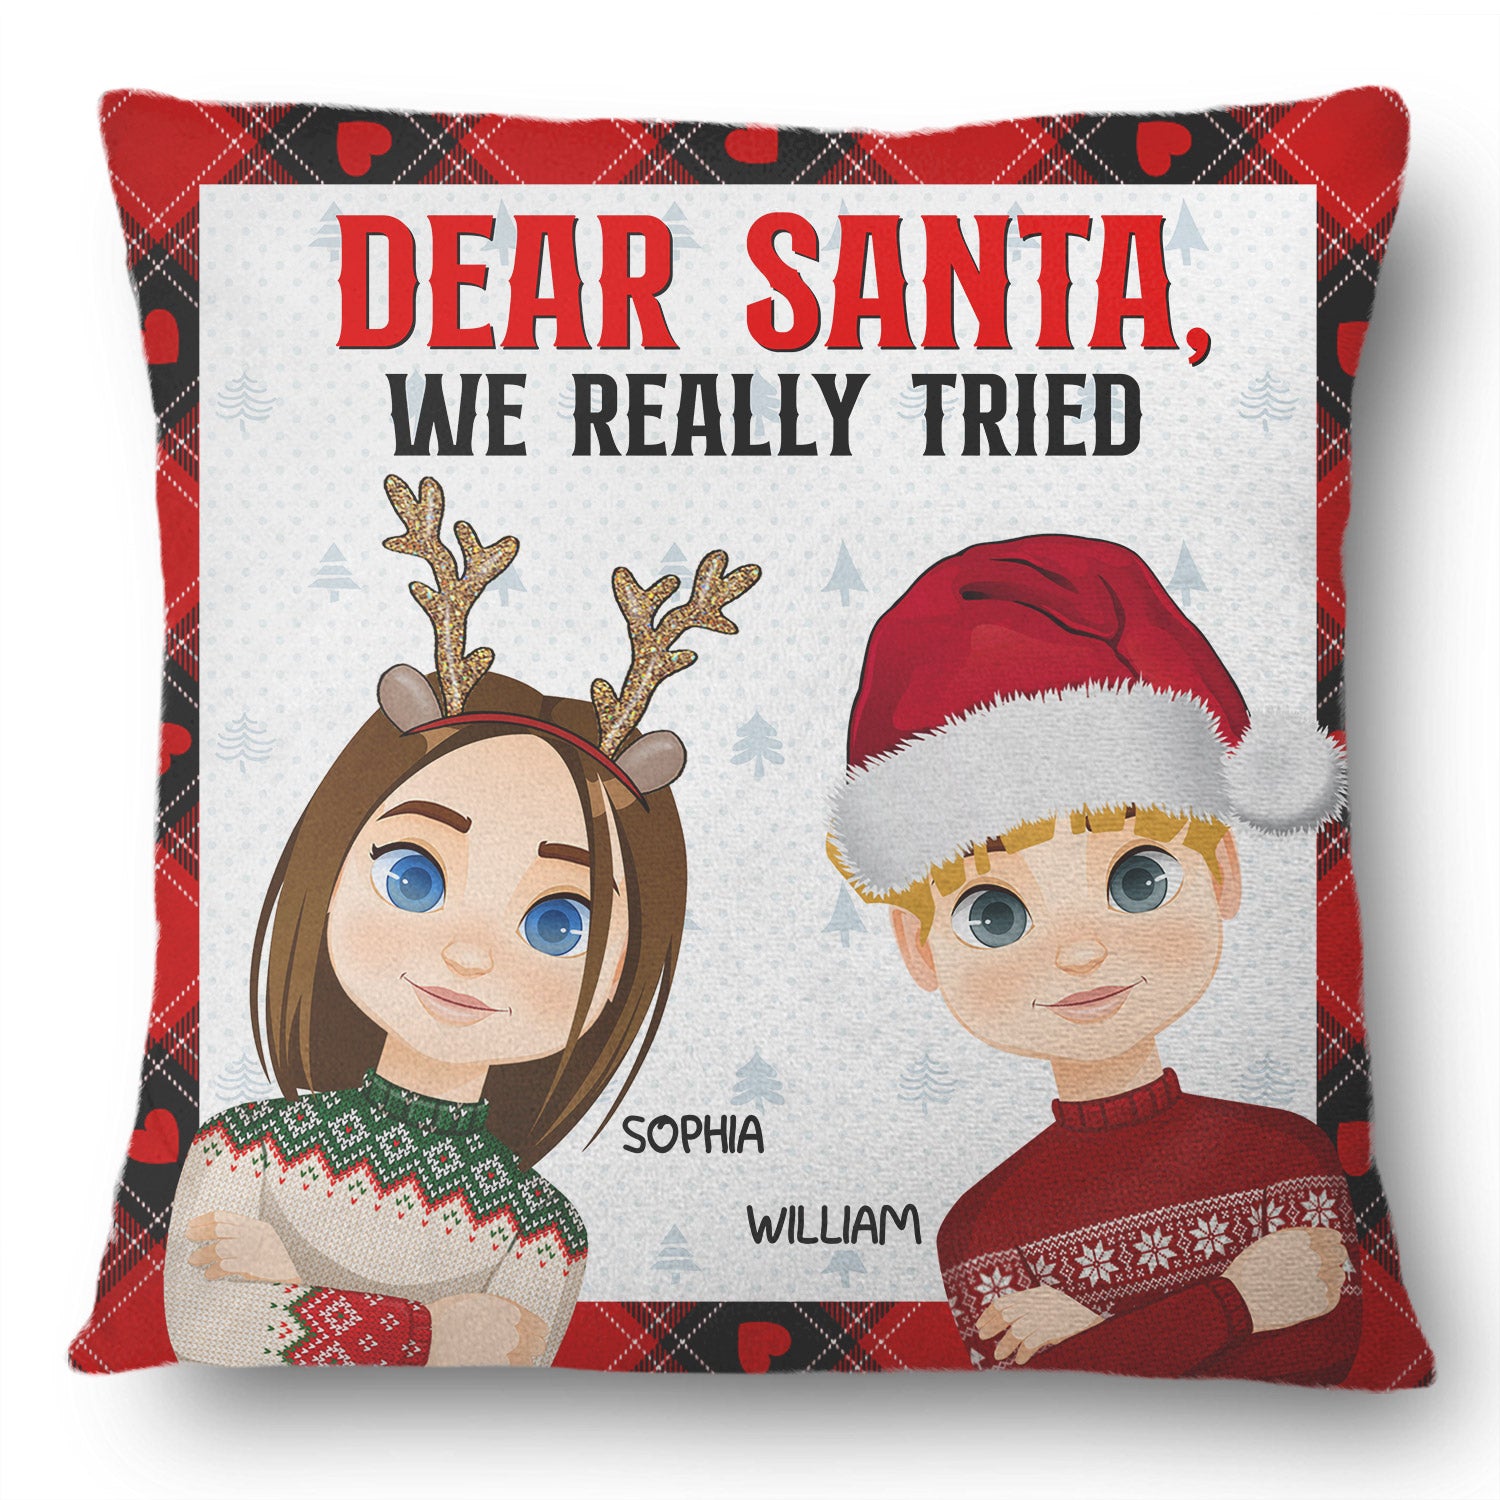 Dear Santa I Really Tried - Christmas Gift For Daughter, Granddaughter, Son, Grandson, Kid, Grandkid, Family - Personalized Pillow